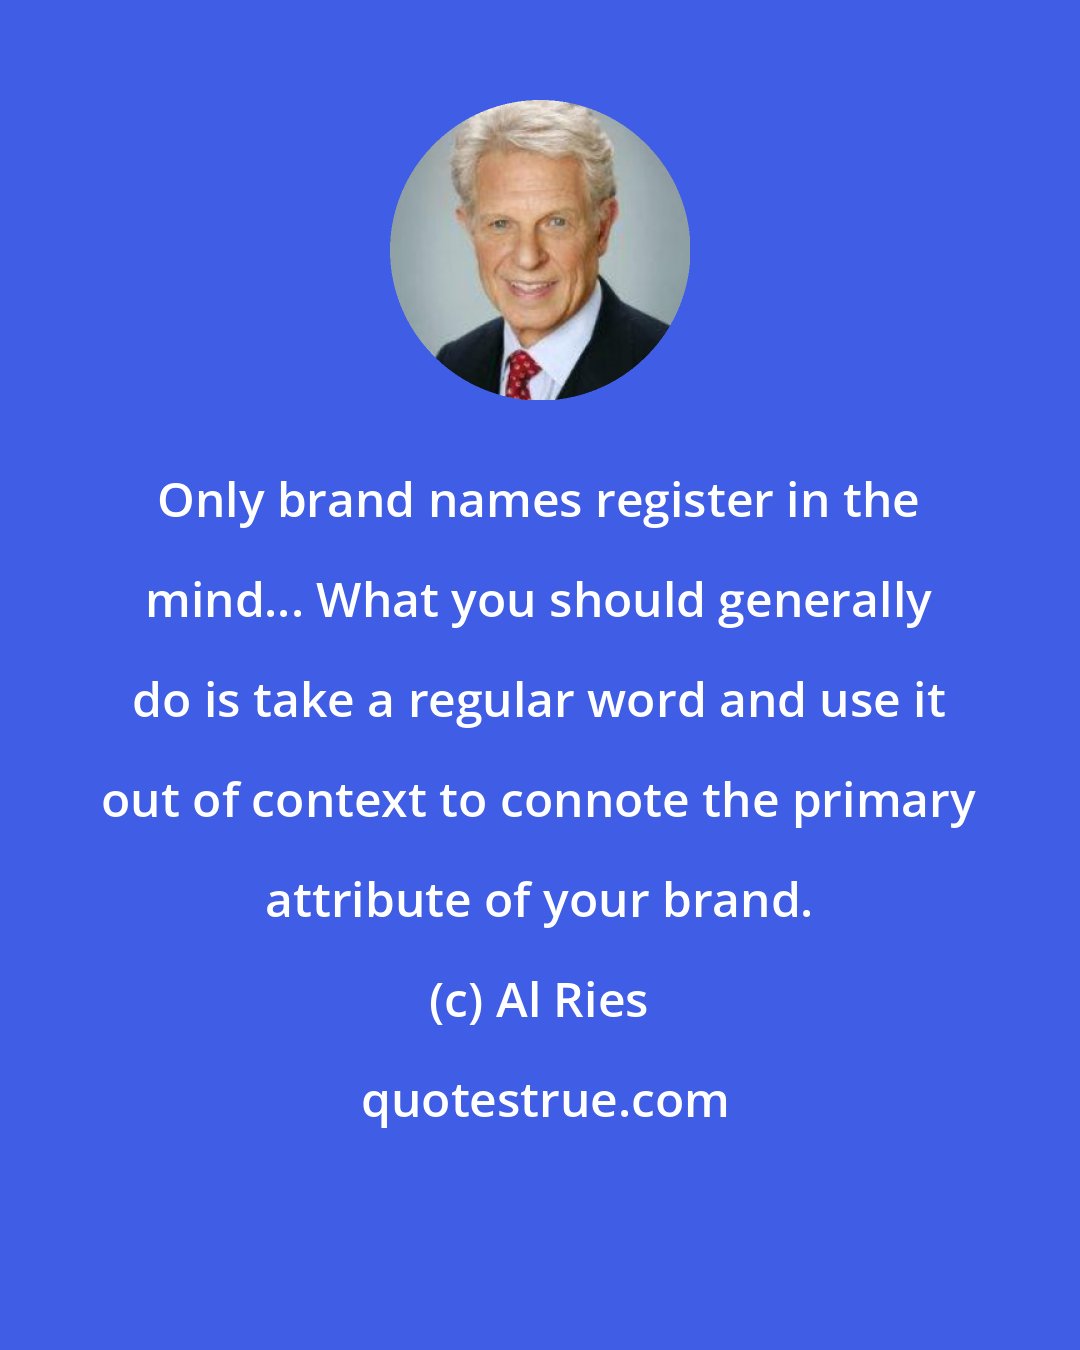 Al Ries: Only brand names register in the mind... What you should generally do is take a regular word and use it out of context to connote the primary attribute of your brand.